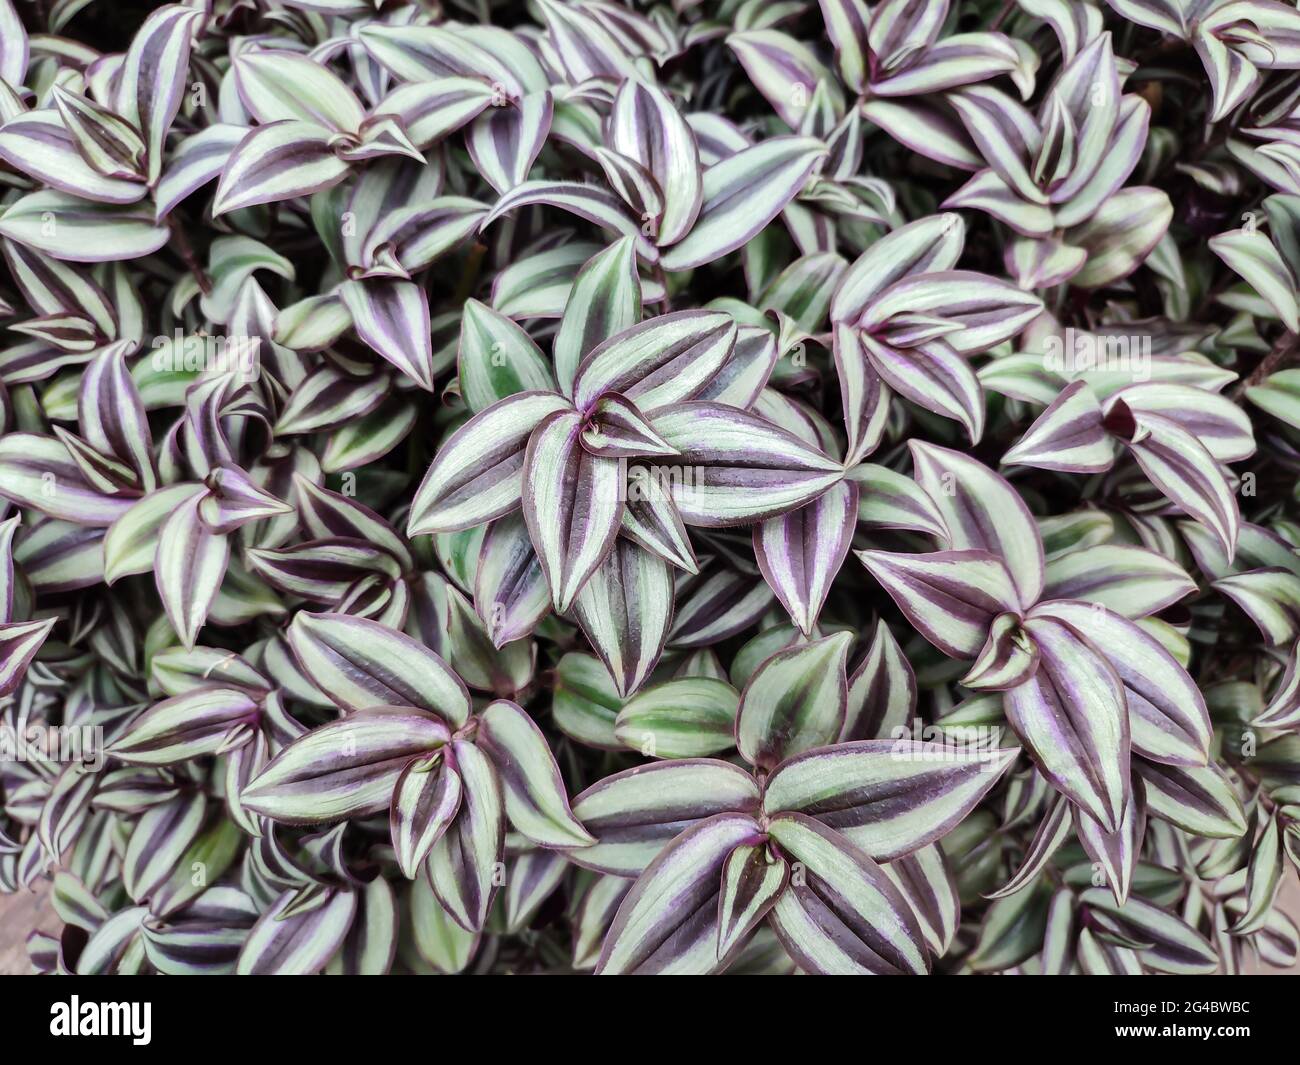 Tradescantia zebrina plant with purple and green striped leaves, nature background Stock Photo